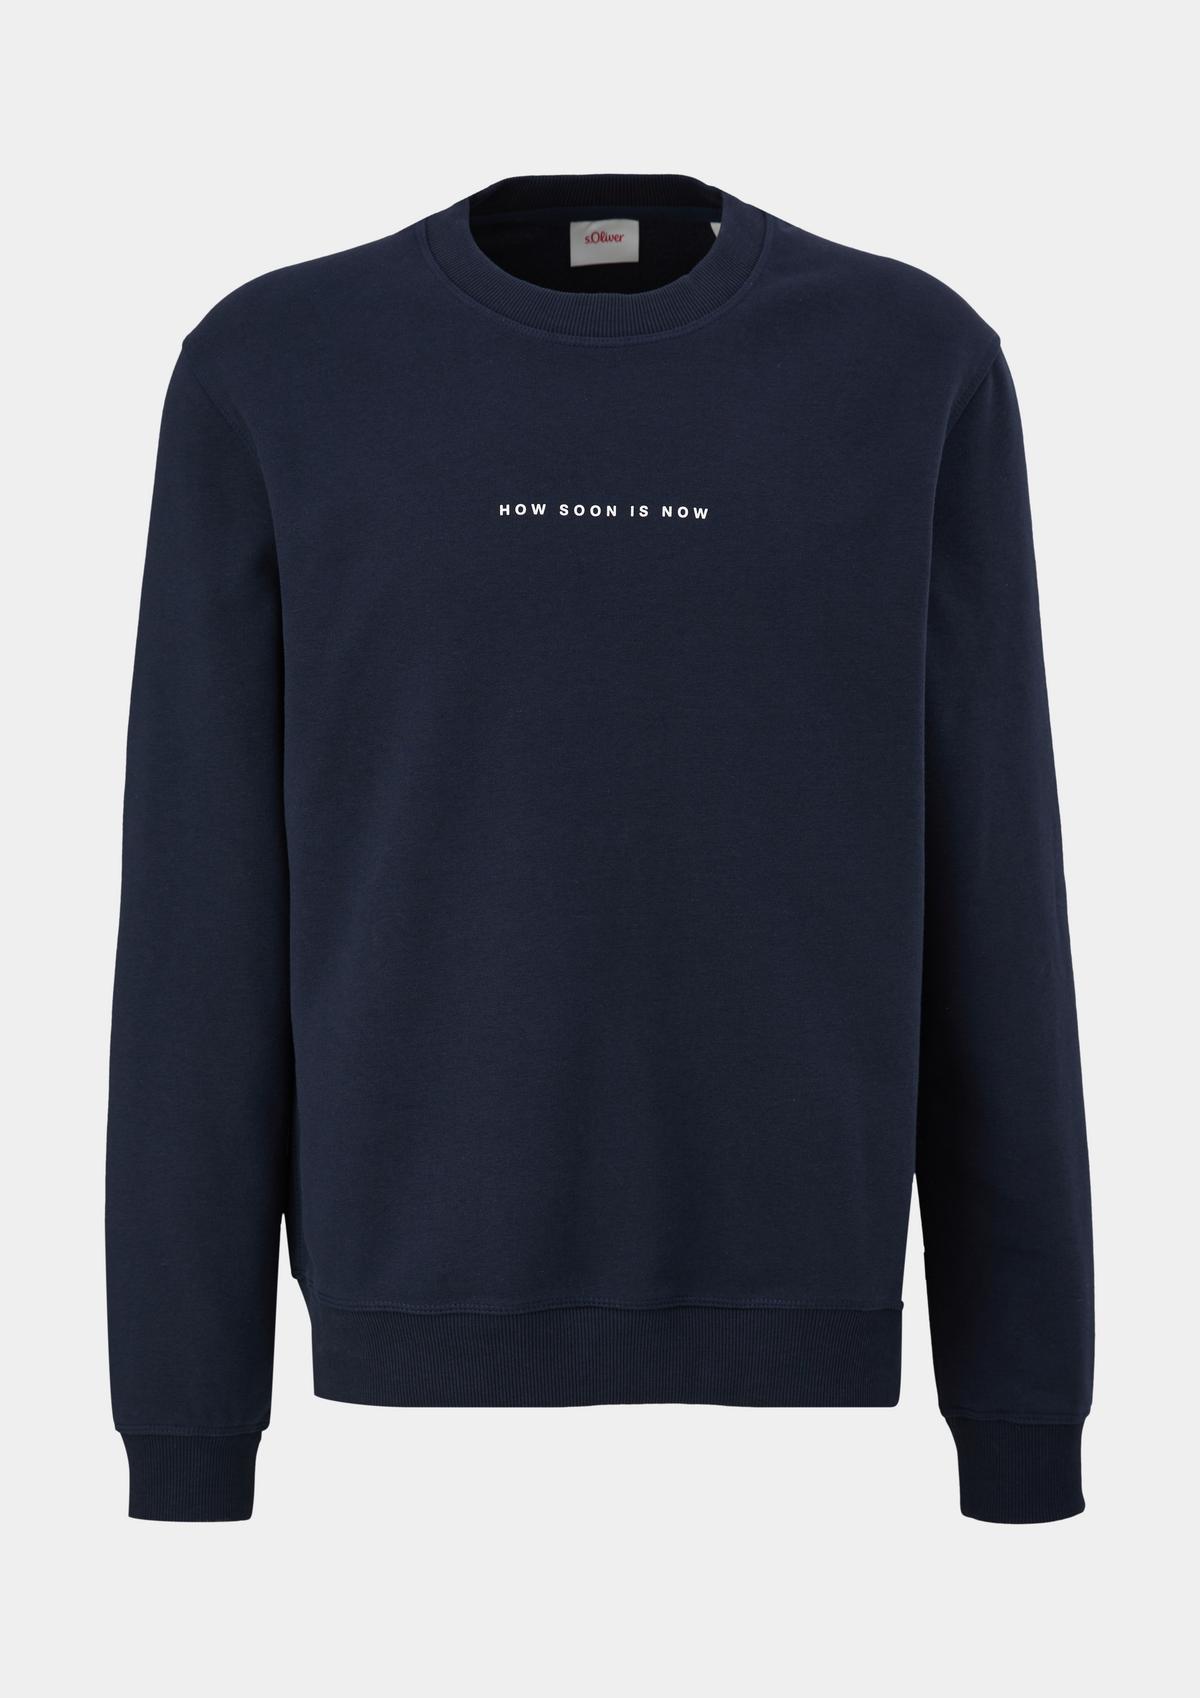 Sweatshirt with navy - a print front